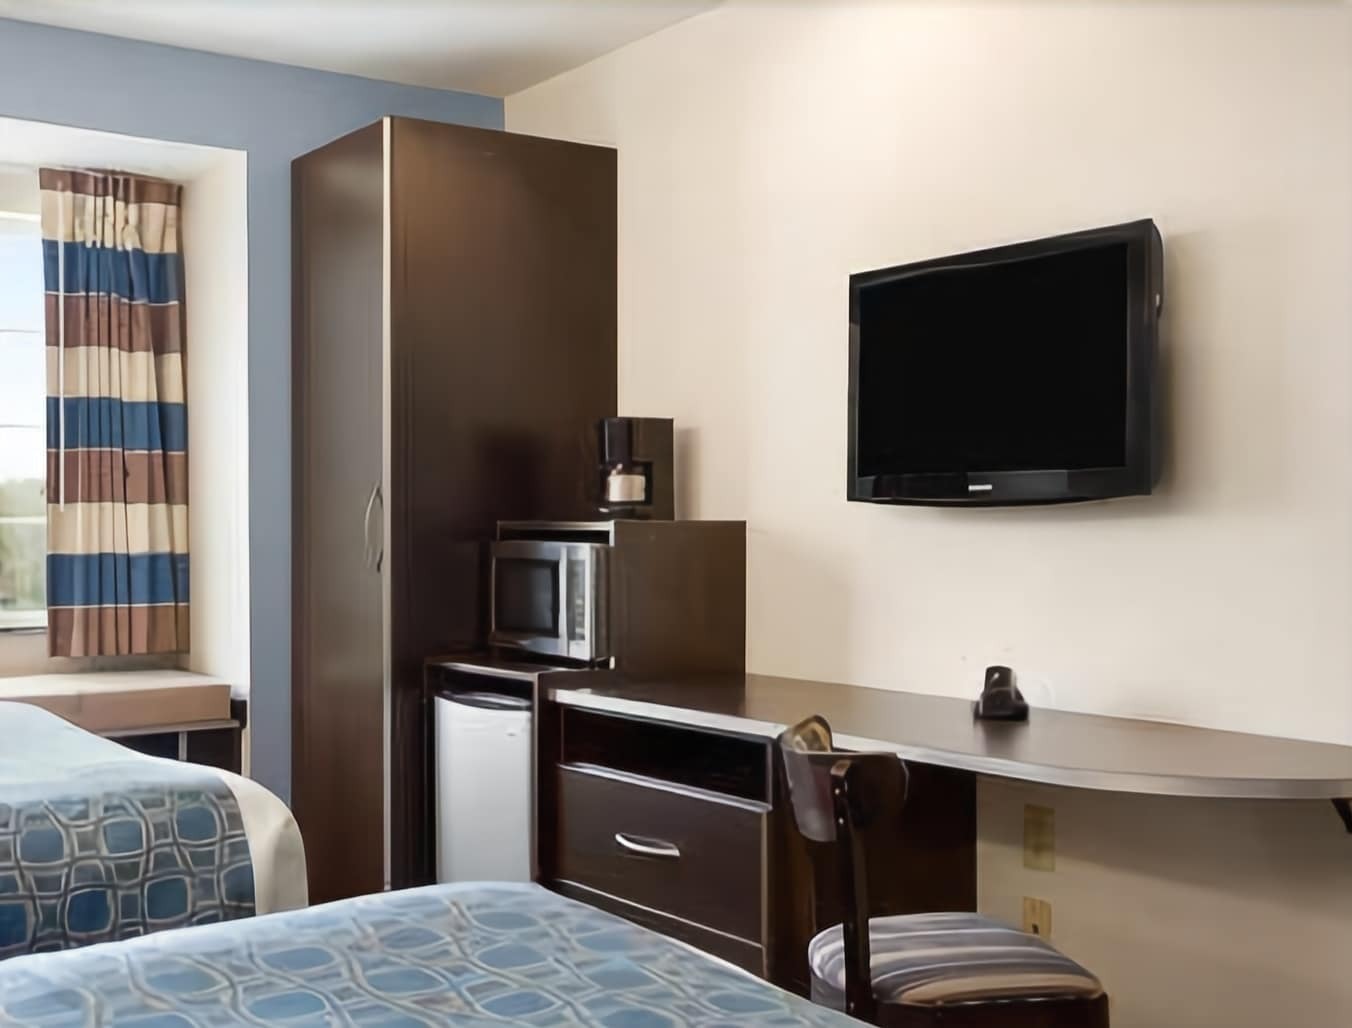 Microtel Inn & Suites Belle Chasse 외부 사진